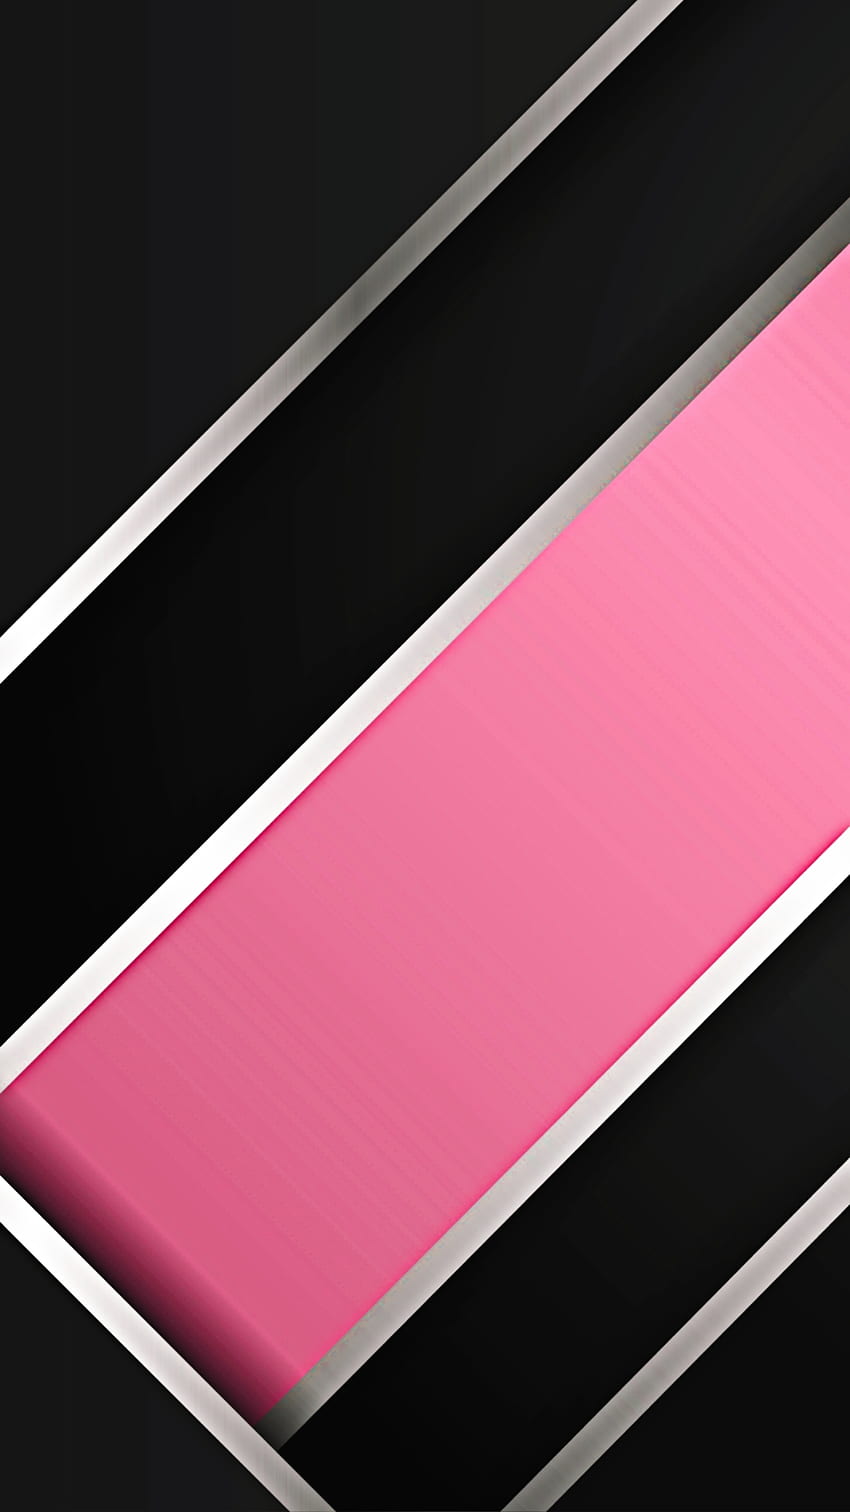 material design pink, stripes, awesome, amoled, modern, neon, texture, cool, silver, abstract, lines HD phone wallpaper